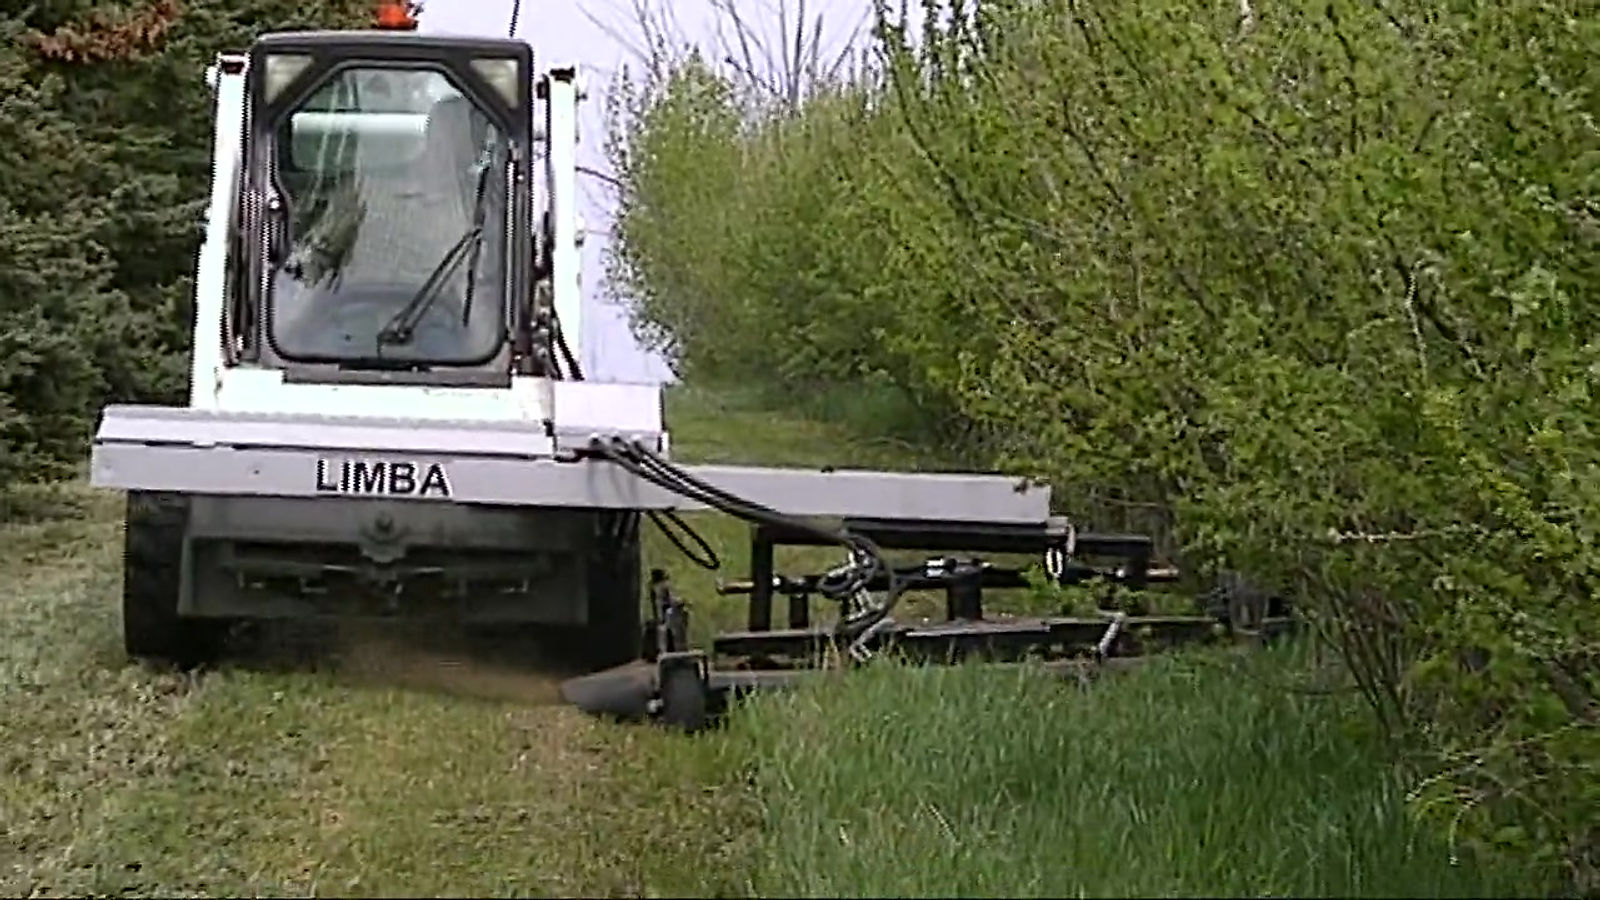 LIMBA with Mower attachment